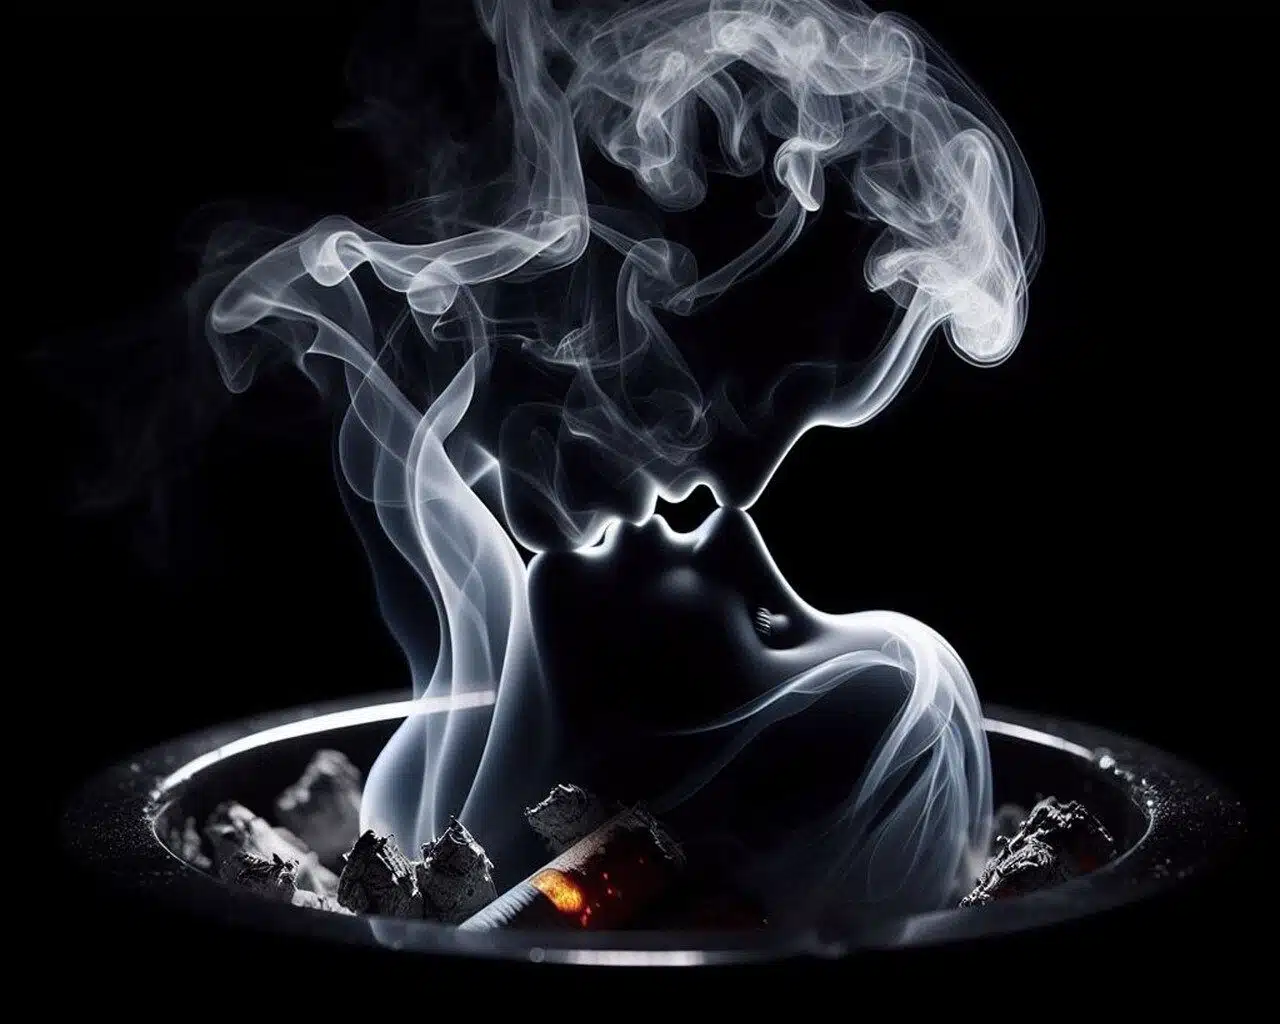 The image shows smoke silhouettes of a man and woman kissing which conveys the sensual message in this poem titled "In my mind"